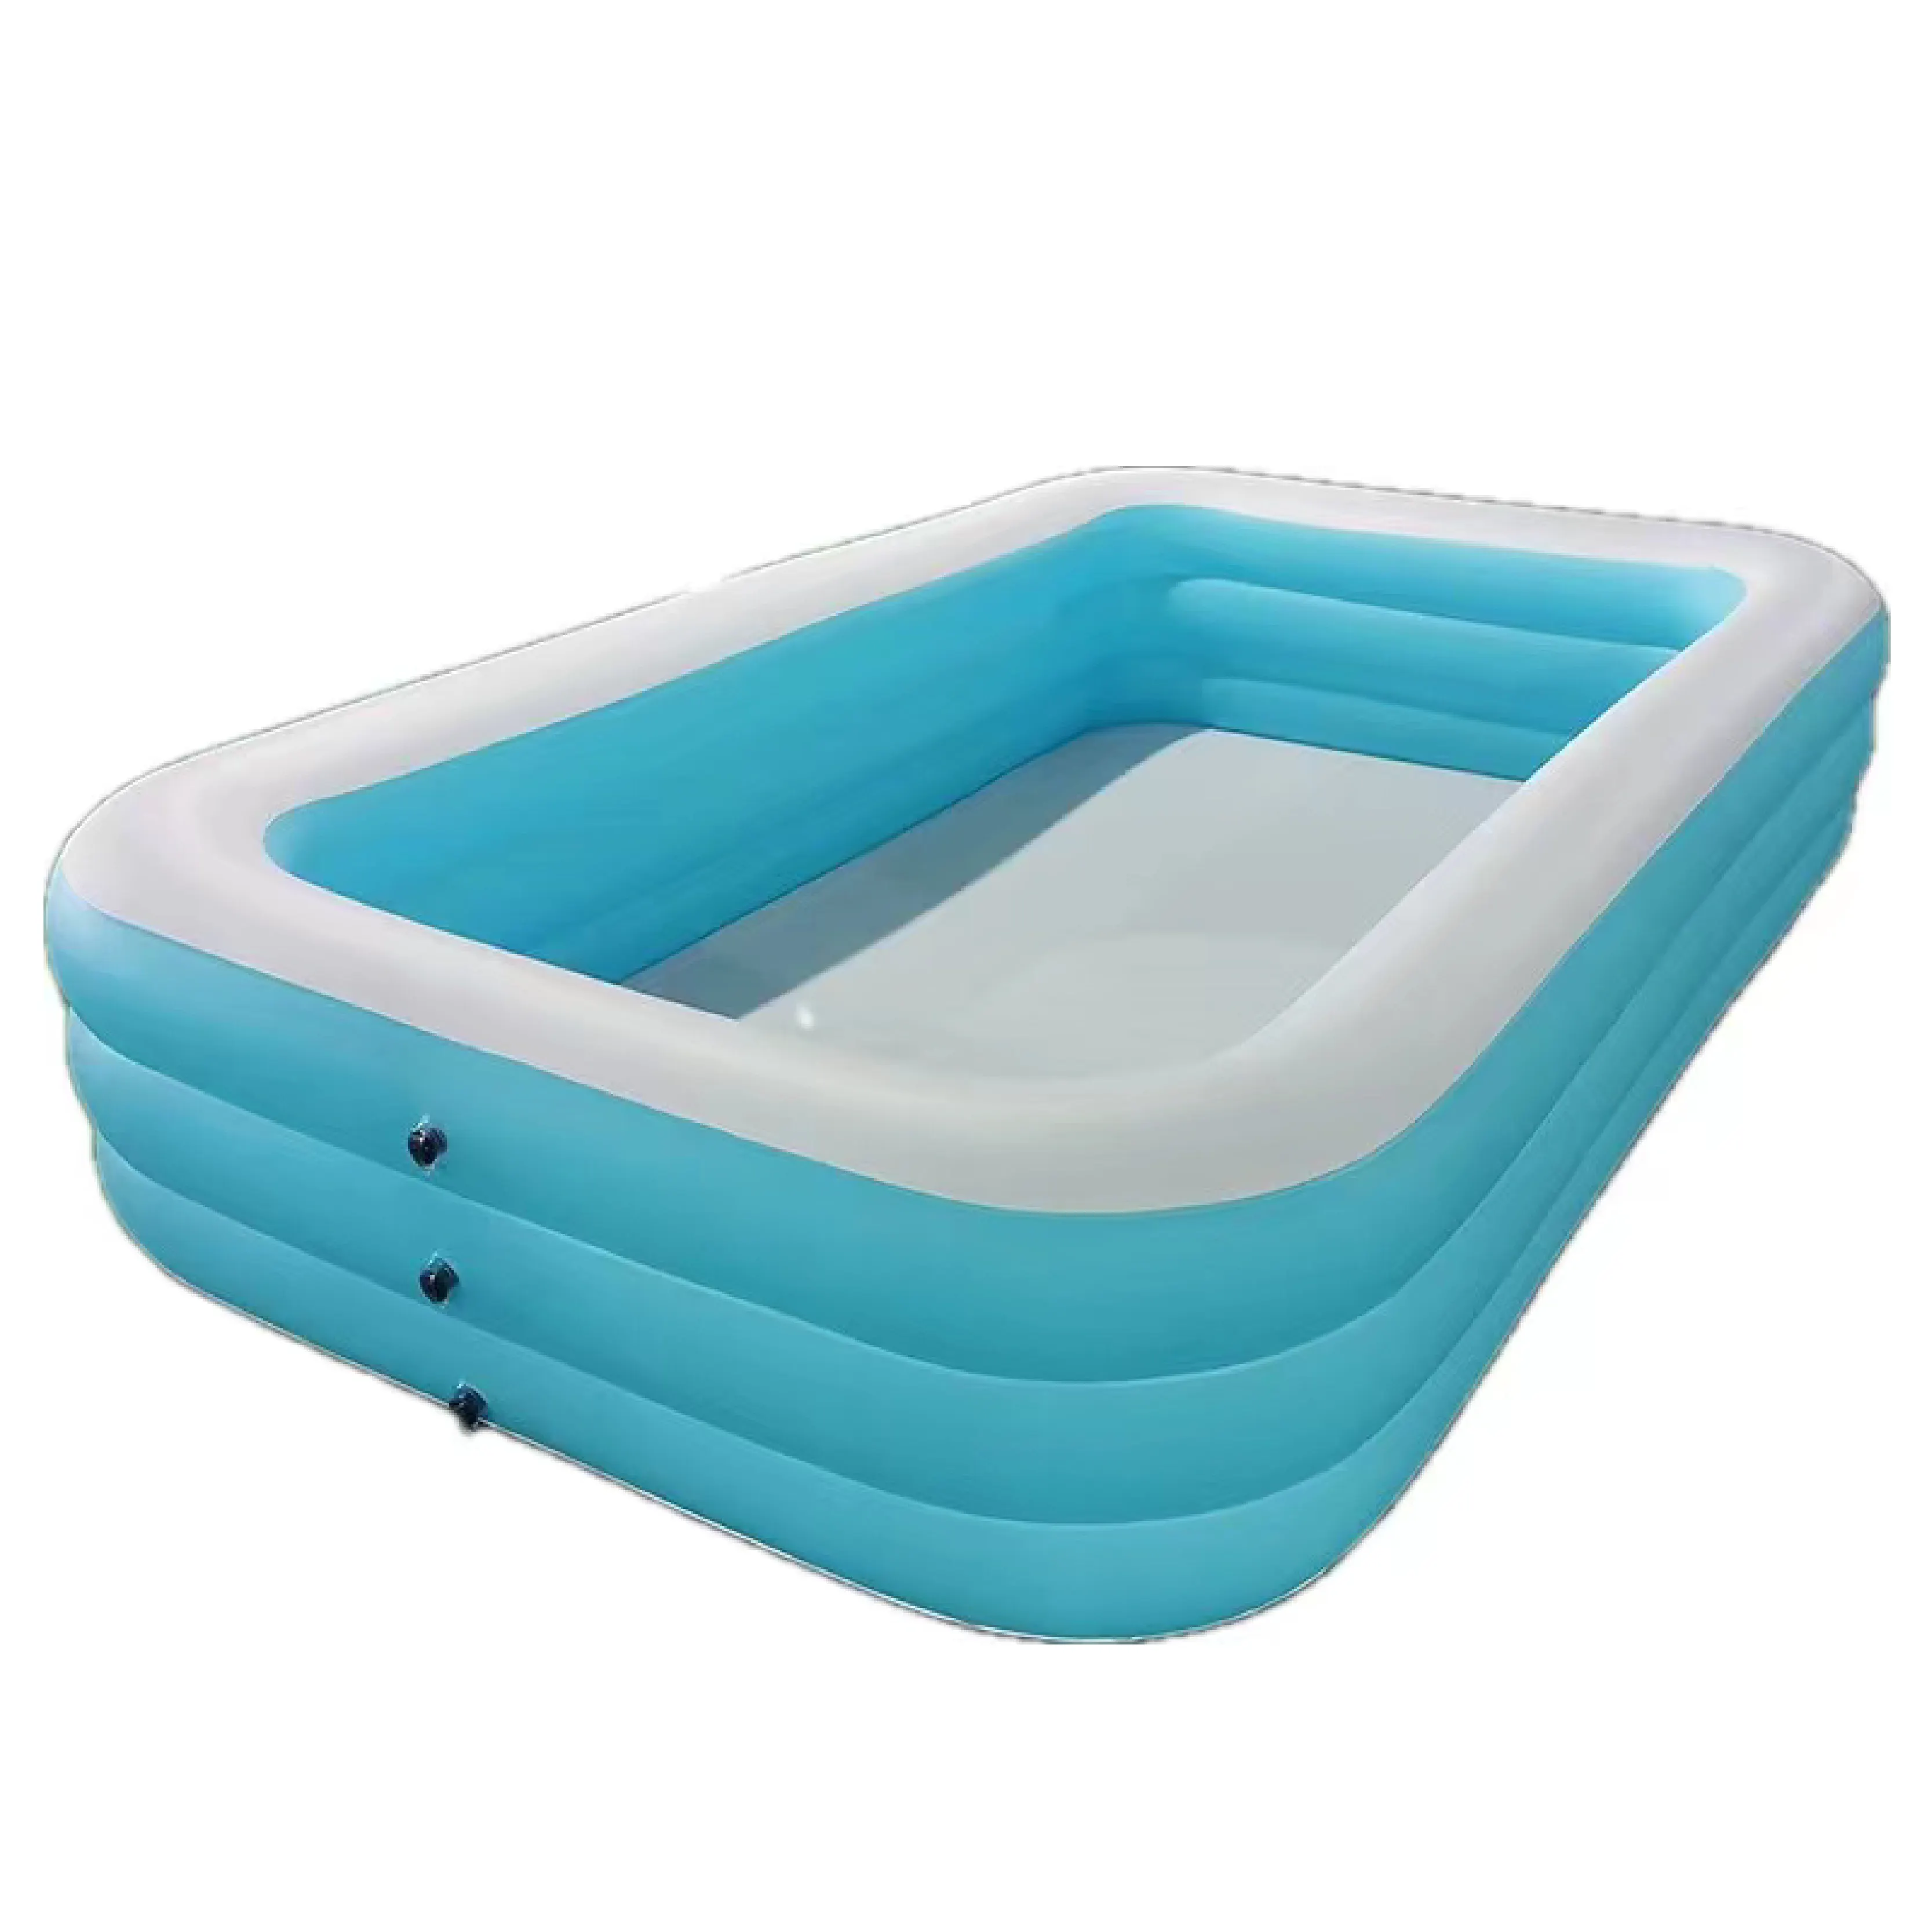 Inflatable pool for children and adults, suitable for summer water parties, extra large thickened inflatable pool